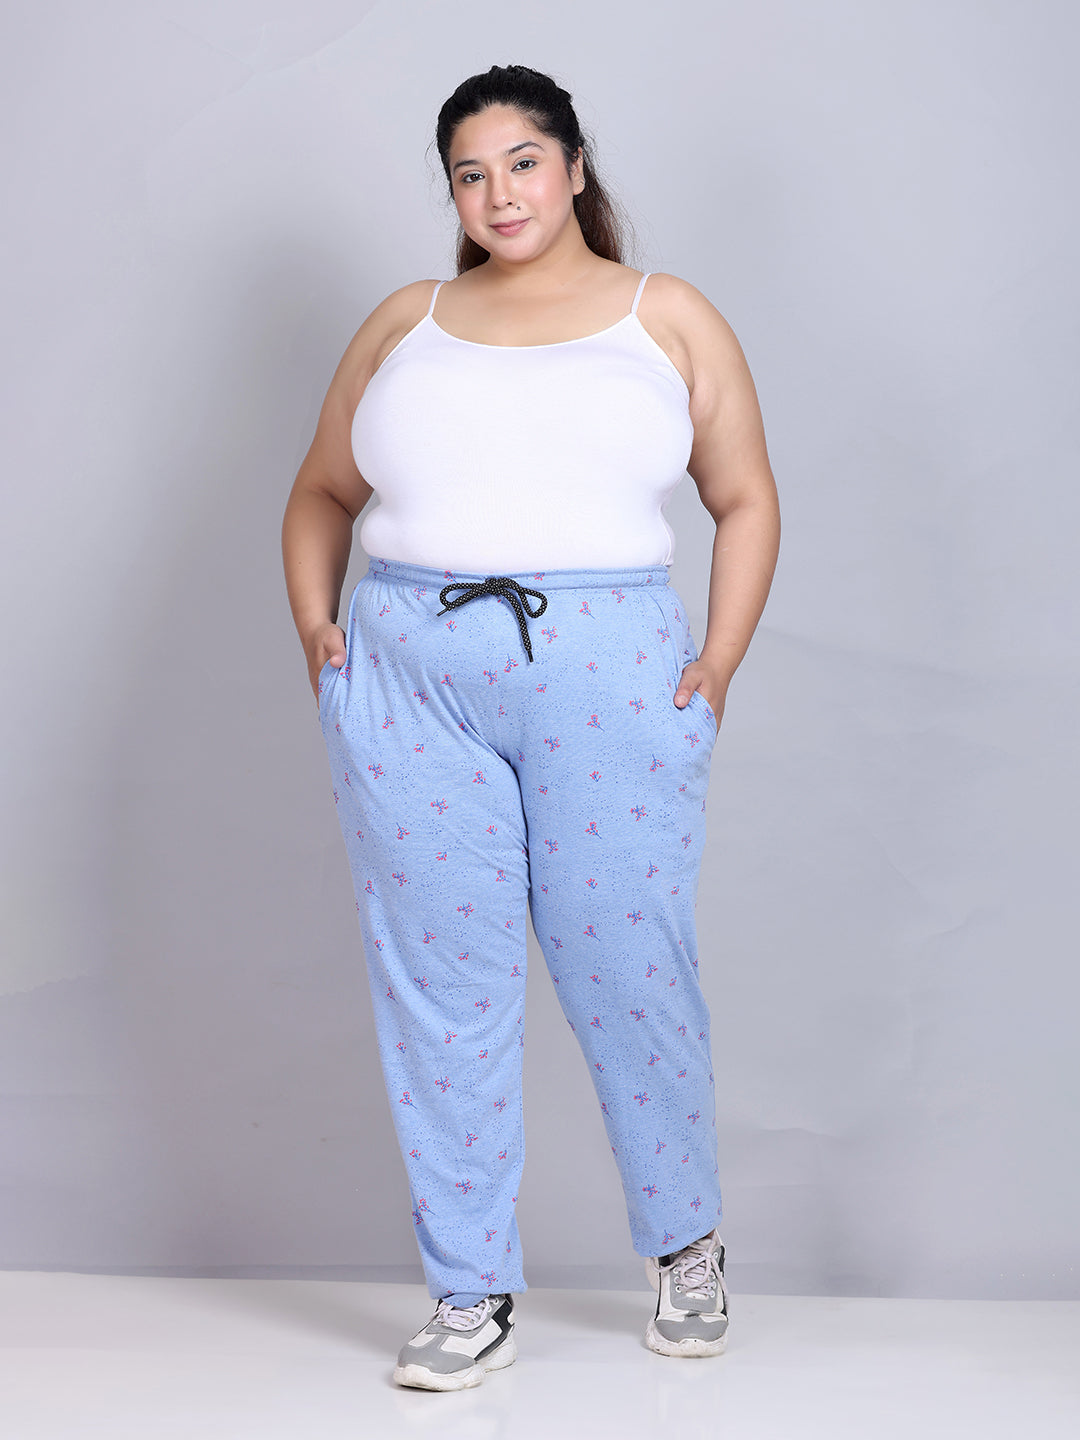 Cotton Printed Night Pants For Women - Blue